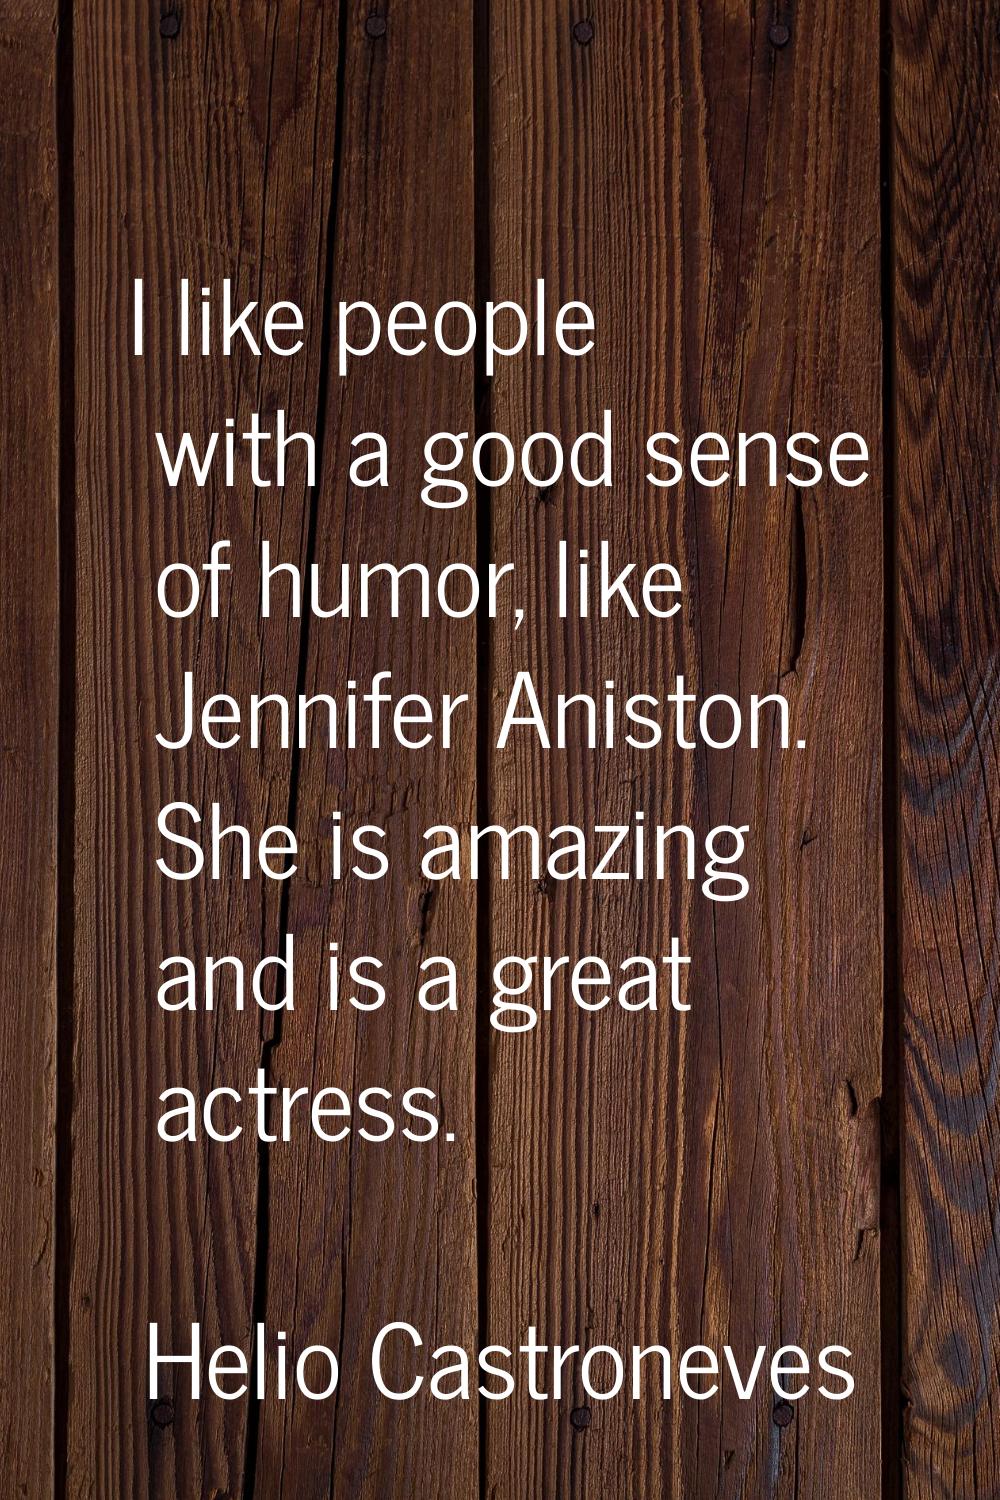 I like people with a good sense of humor, like Jennifer Aniston. She is amazing and is a great actr